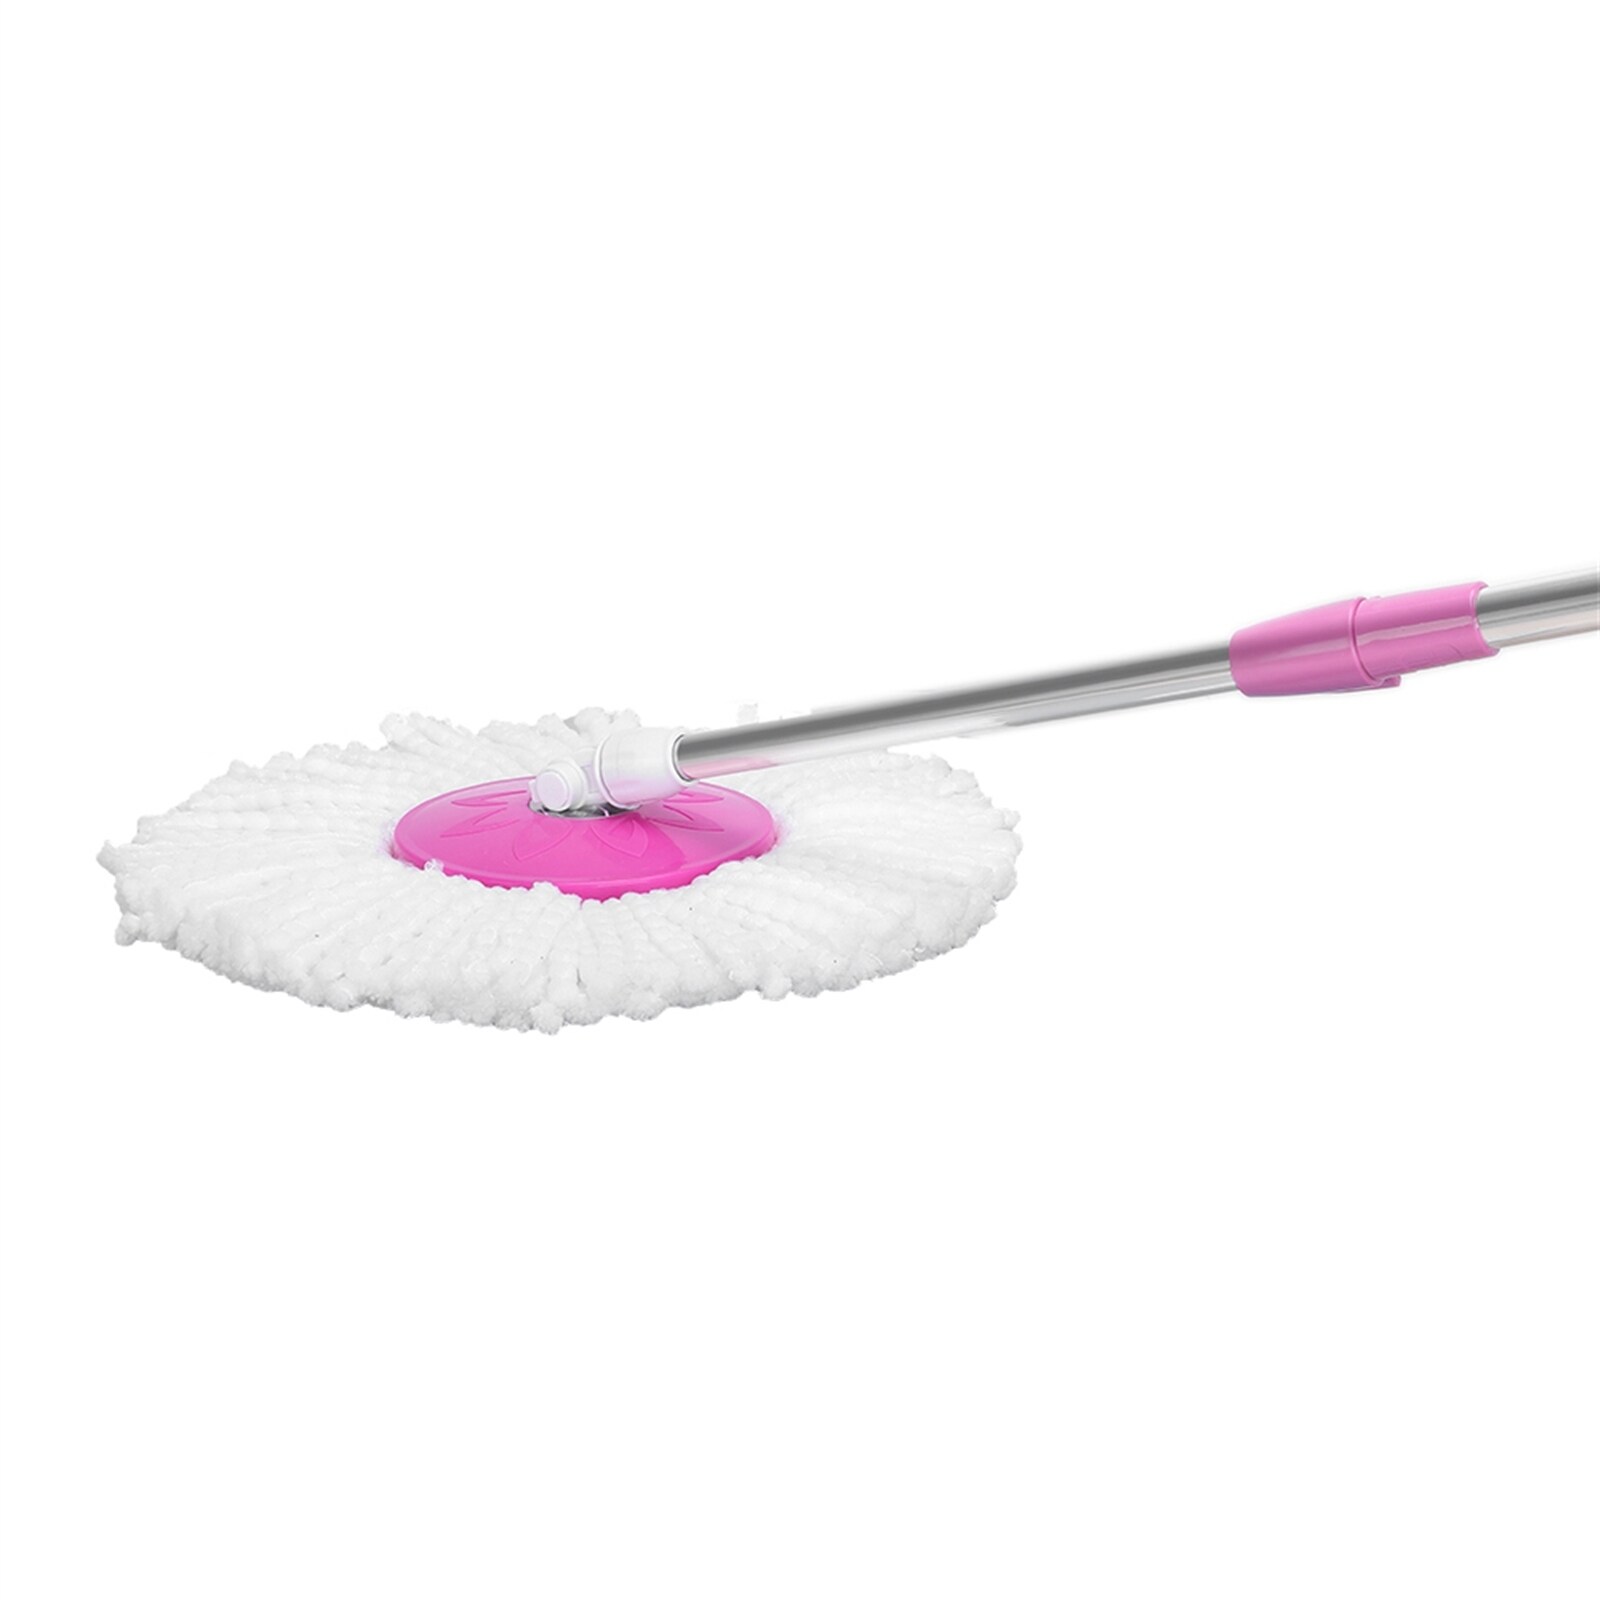 https://ak1.ostkcdn.com/images/products/is/images/direct/7a82a7b1218f2c0ab00f27fee4126ba95eb206a1/360%C2%B0-Spin-Mop-with-Bucket-%26-Dual-Mop-Heads.jpg